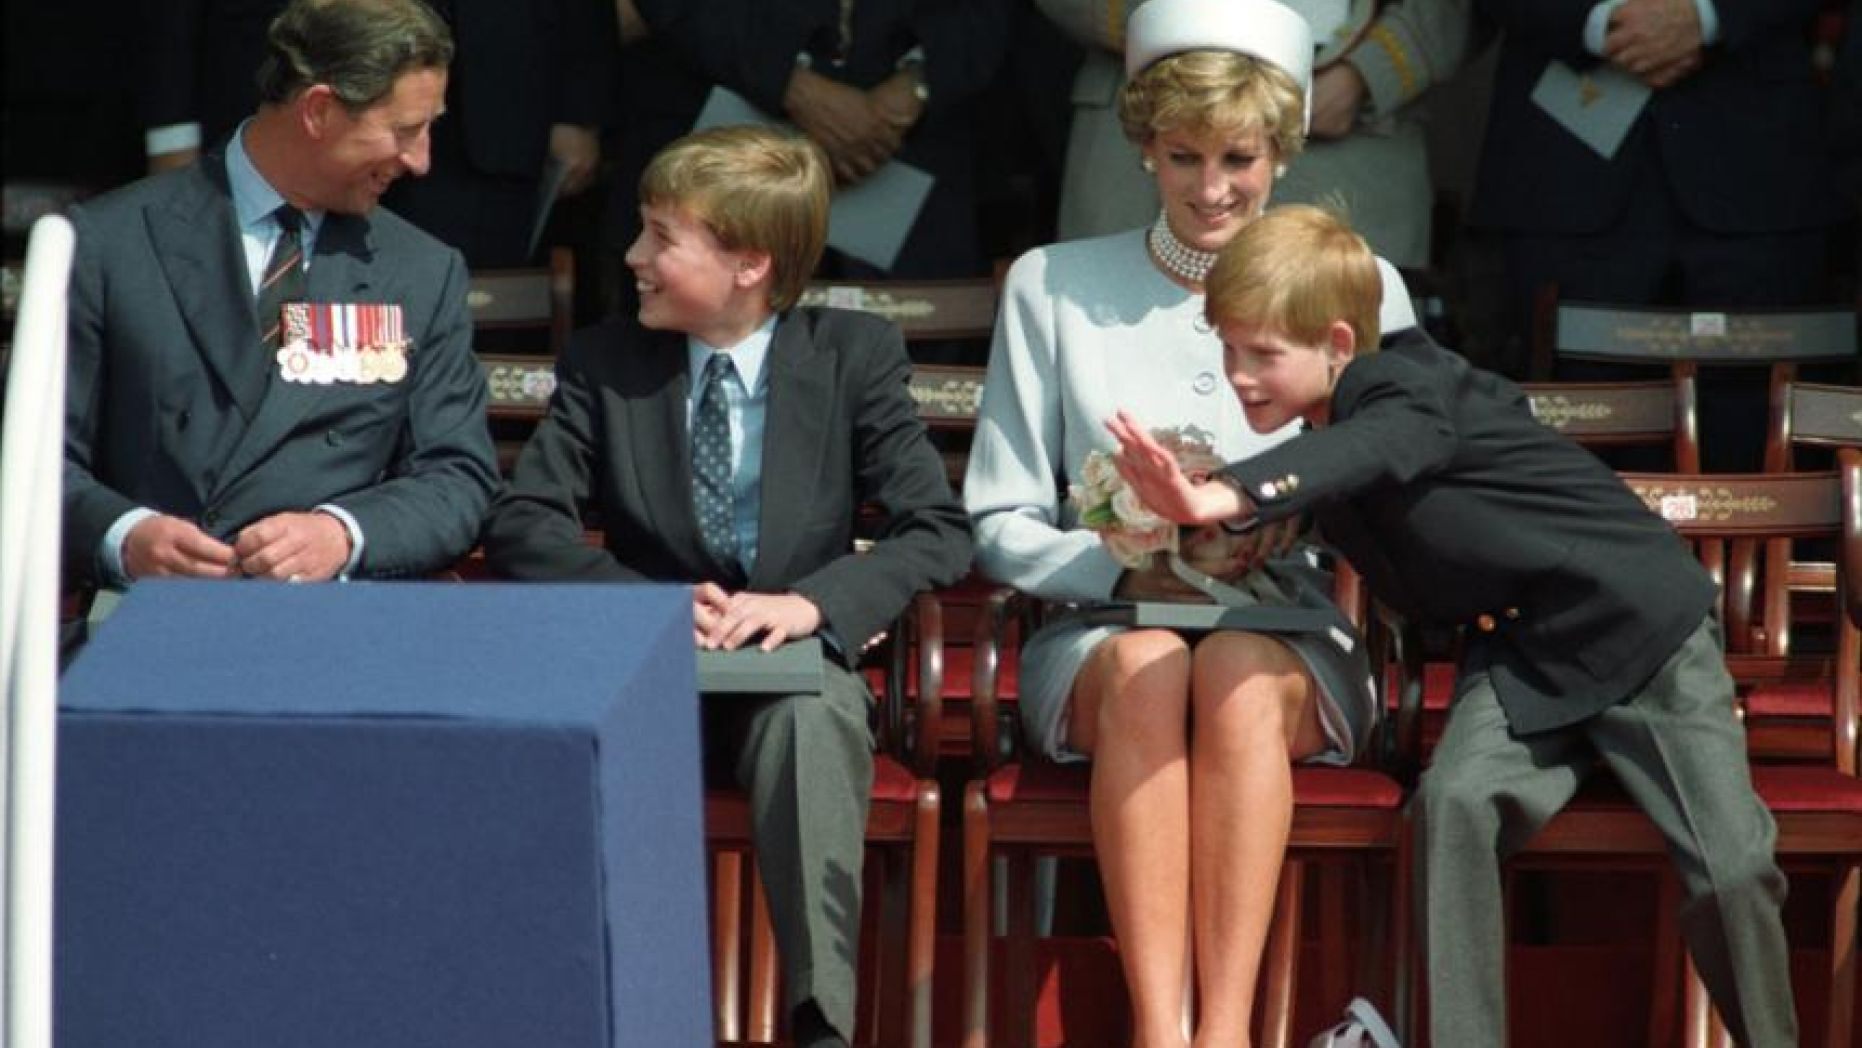 Prince Harry ‘would be completely left out’ by other royals during his childhood, author claims